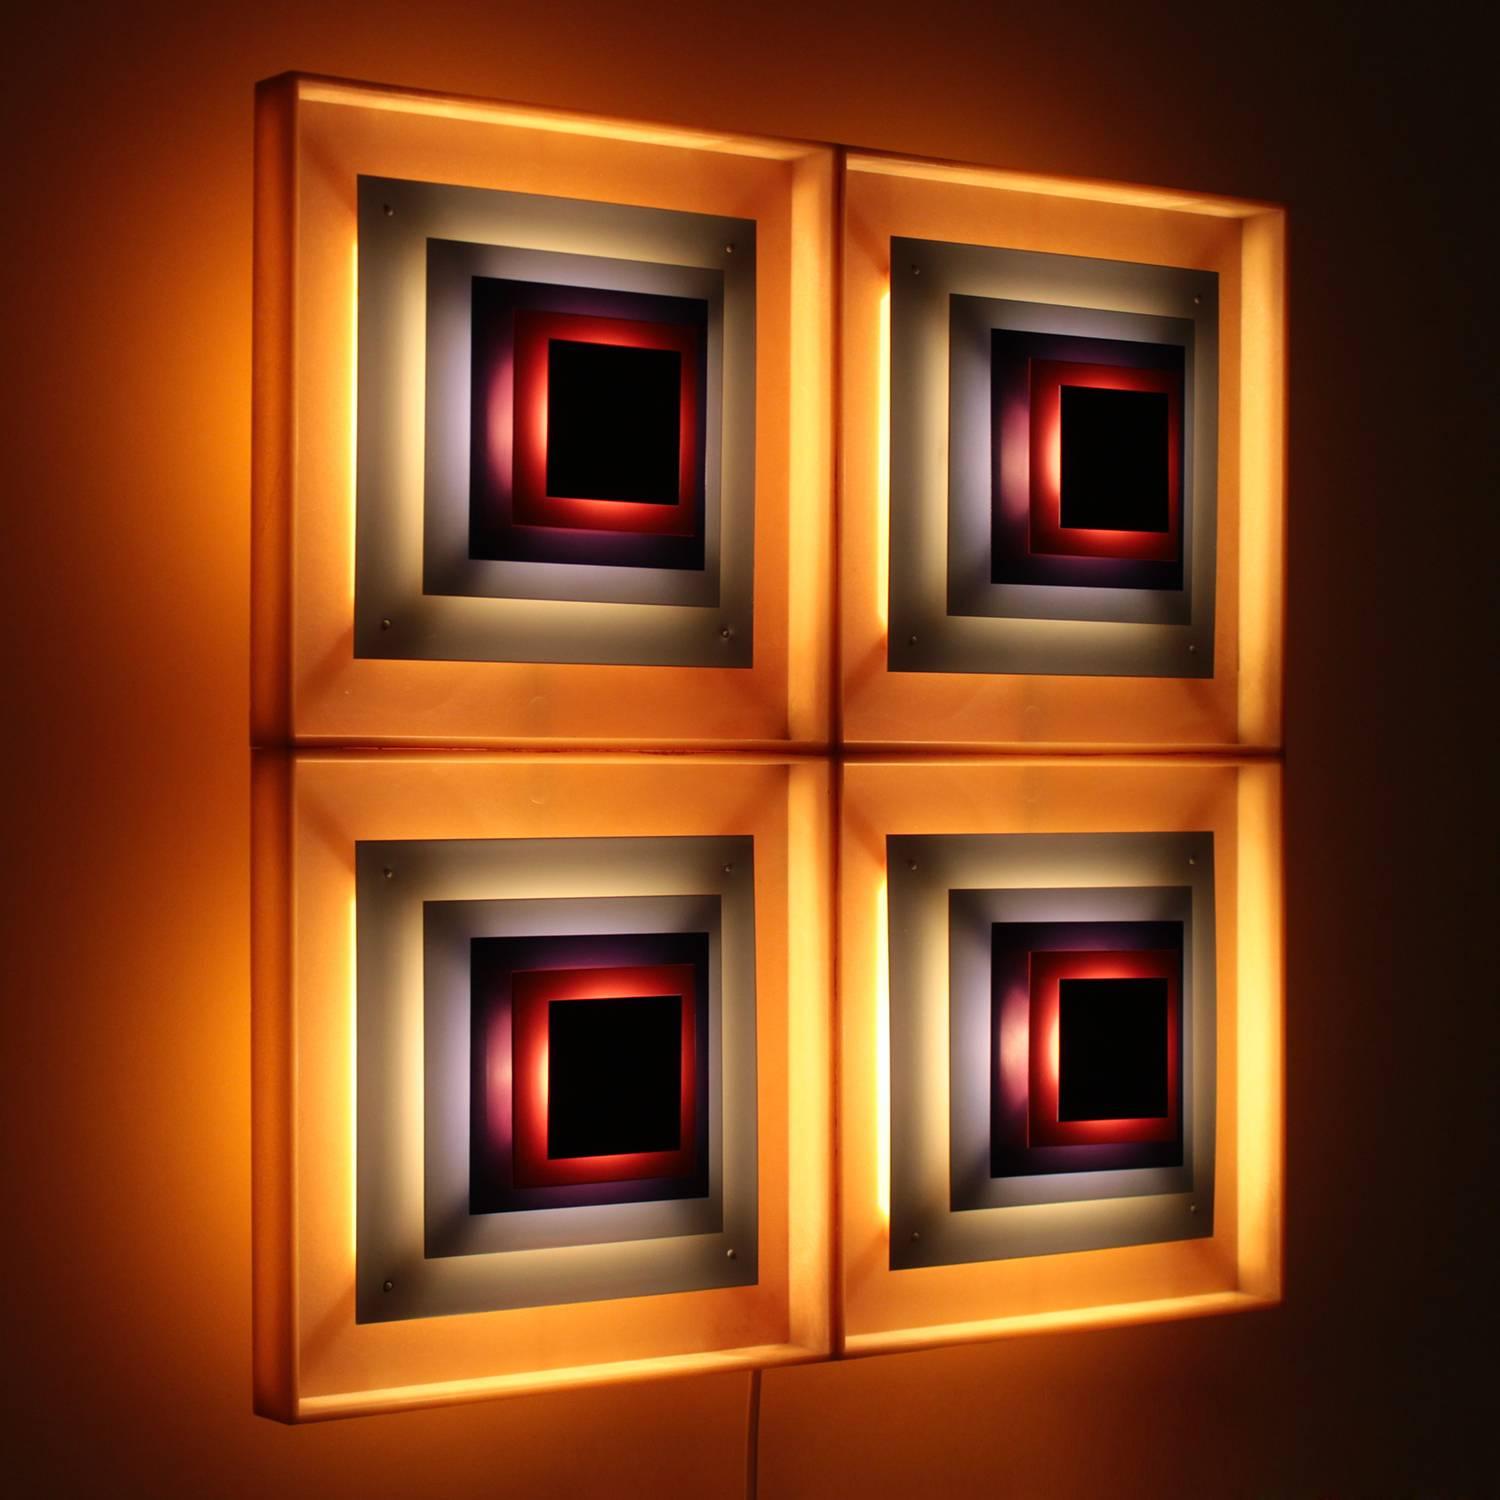 Kvadrille 4-in-1 sconce - breathtaking wall light sculpture by Bent Karlby in 1969 and produced by Lyfa - absolutely gorgeous design piece and in very rare near excellent vintage condition!

This piece is comprised of four Kvadrille wall lights -